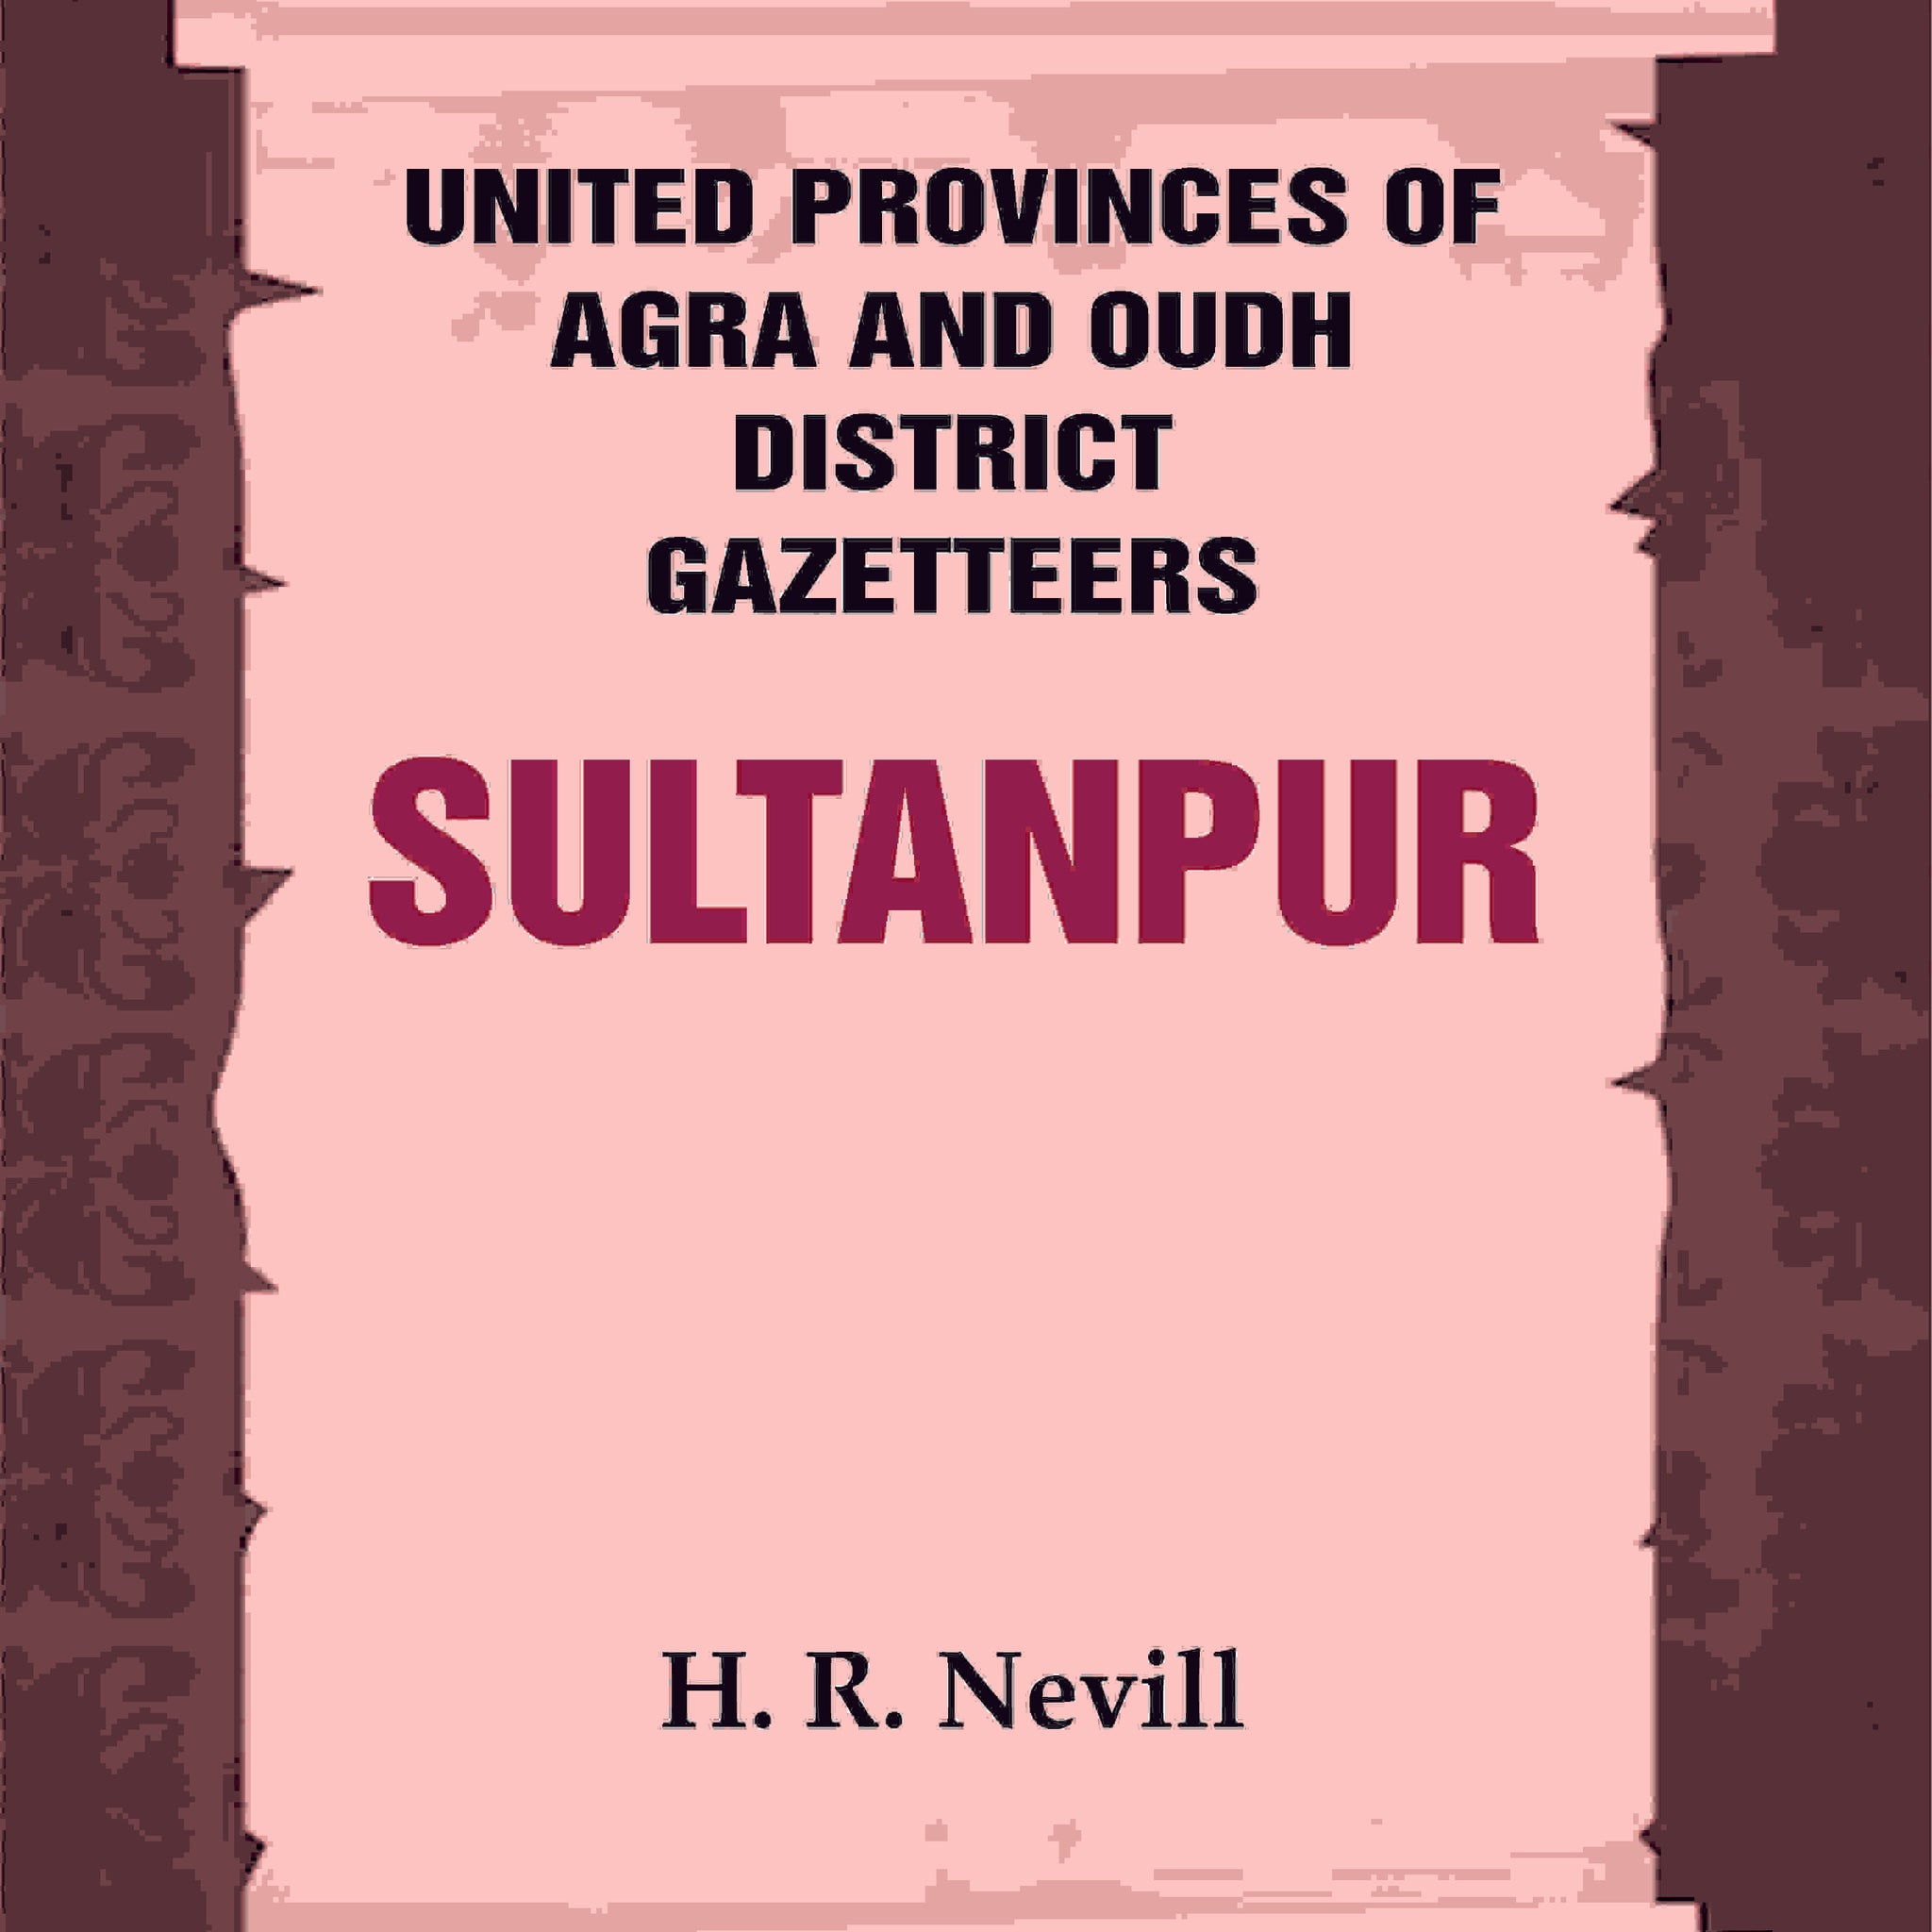 United Provinces of Agra and Oudh District Gazetteers: Sultanpur